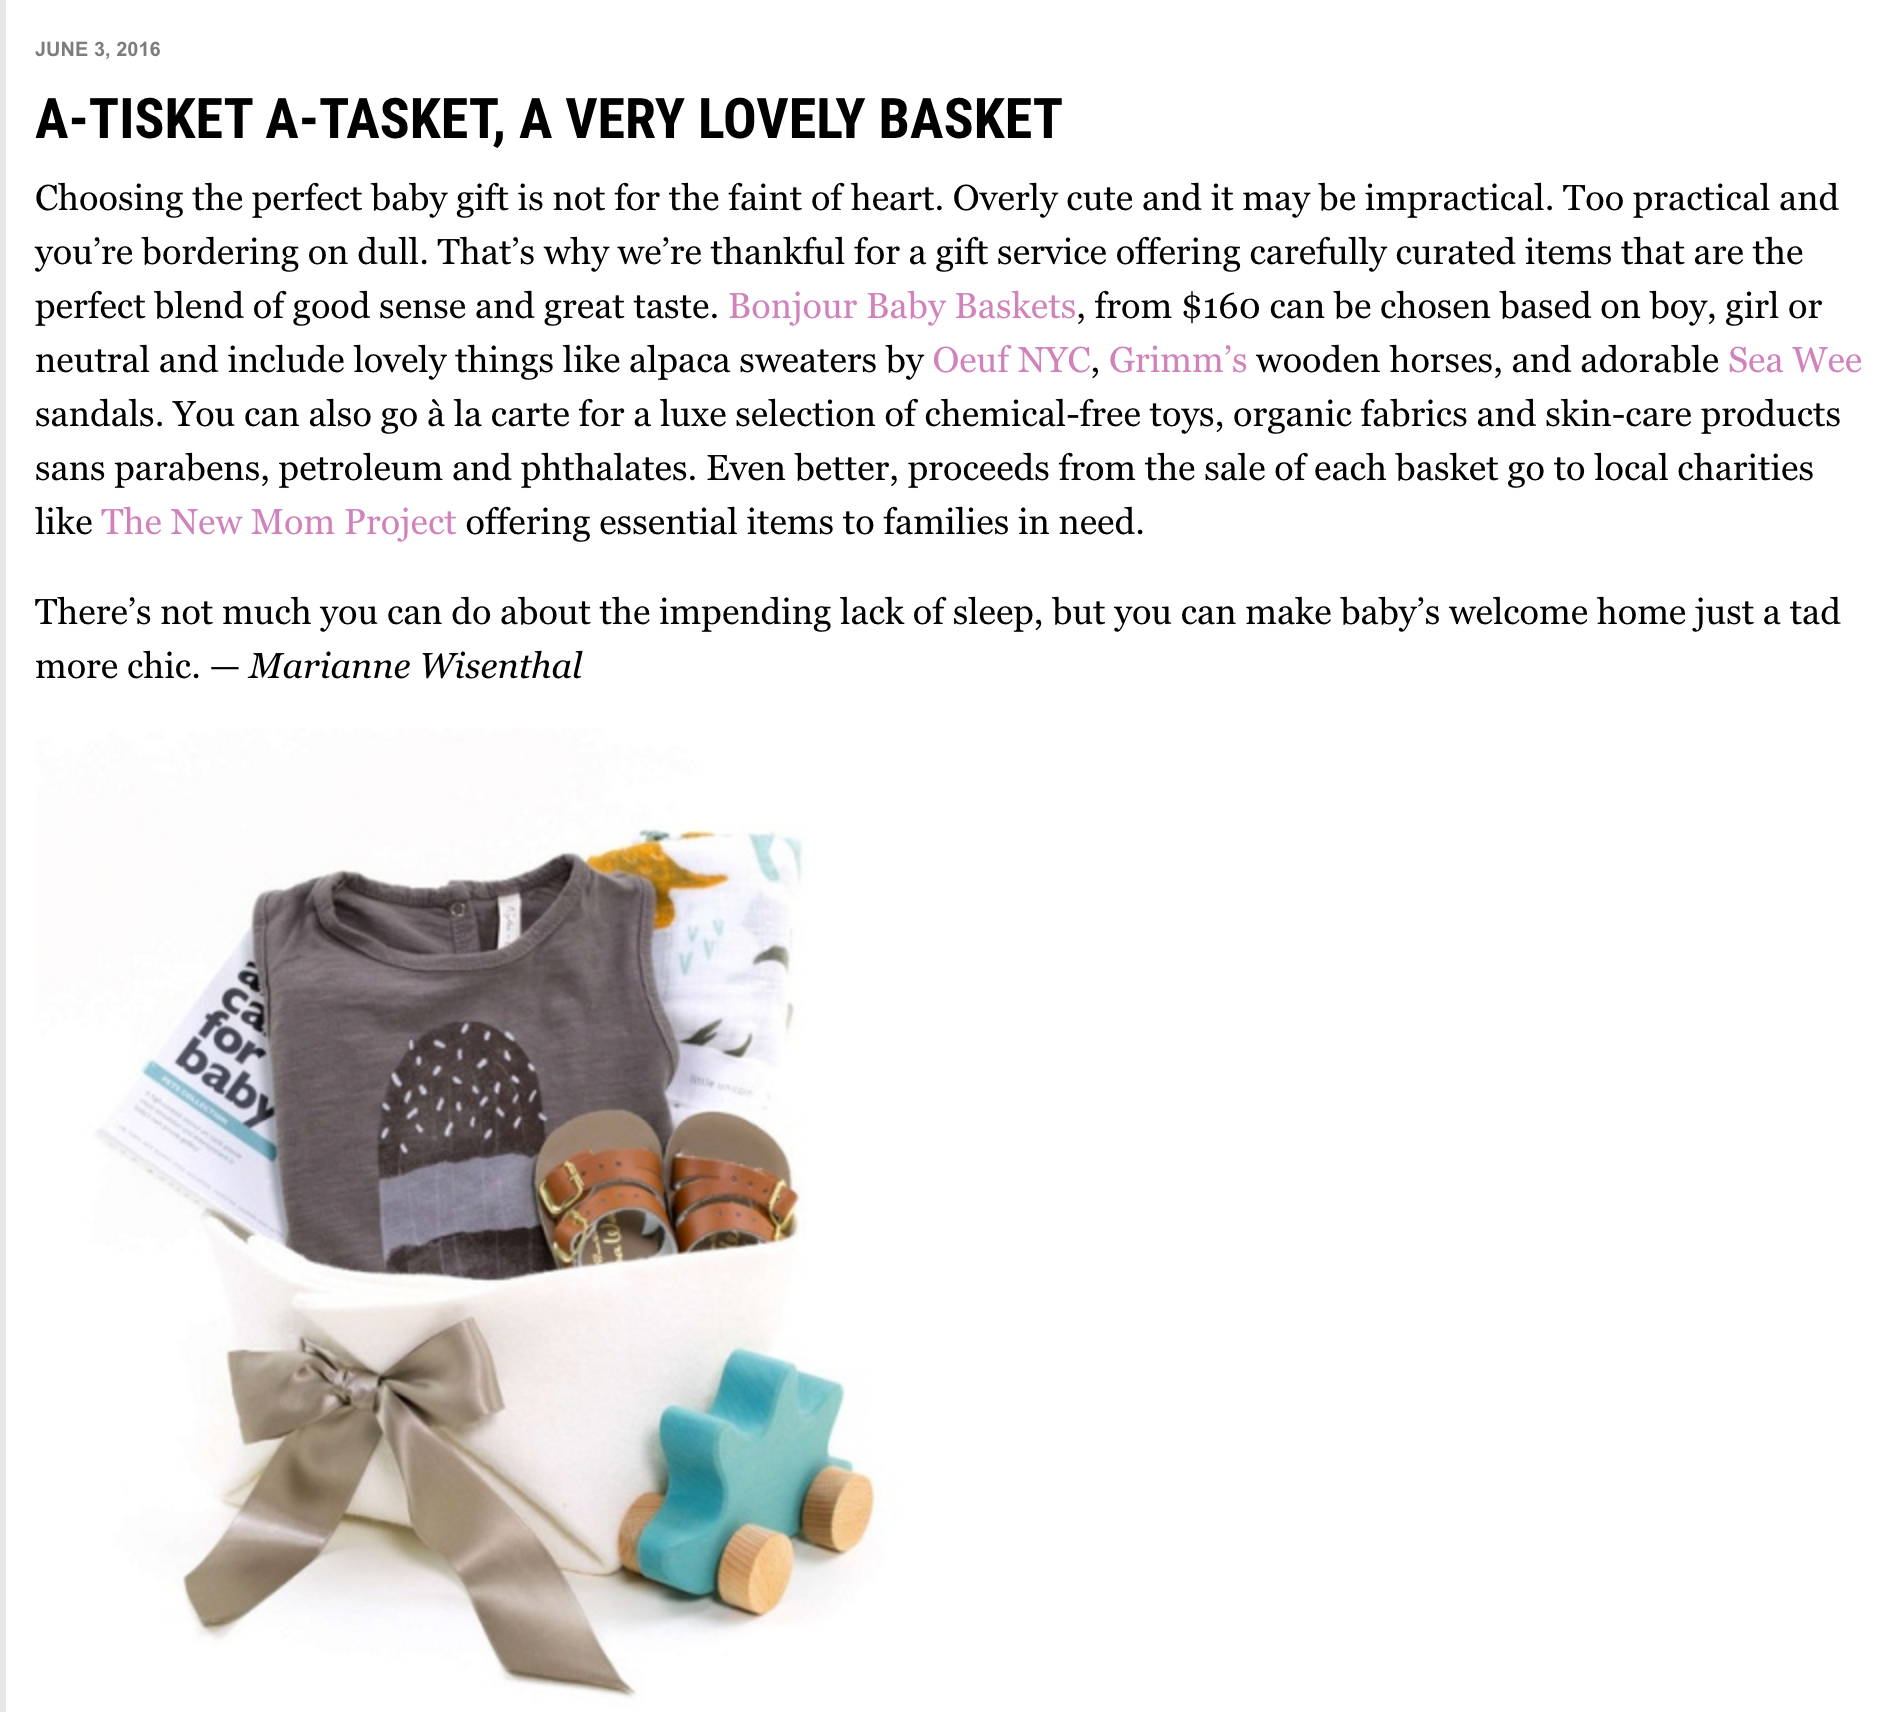 Review of Bonjour Baby Baskets